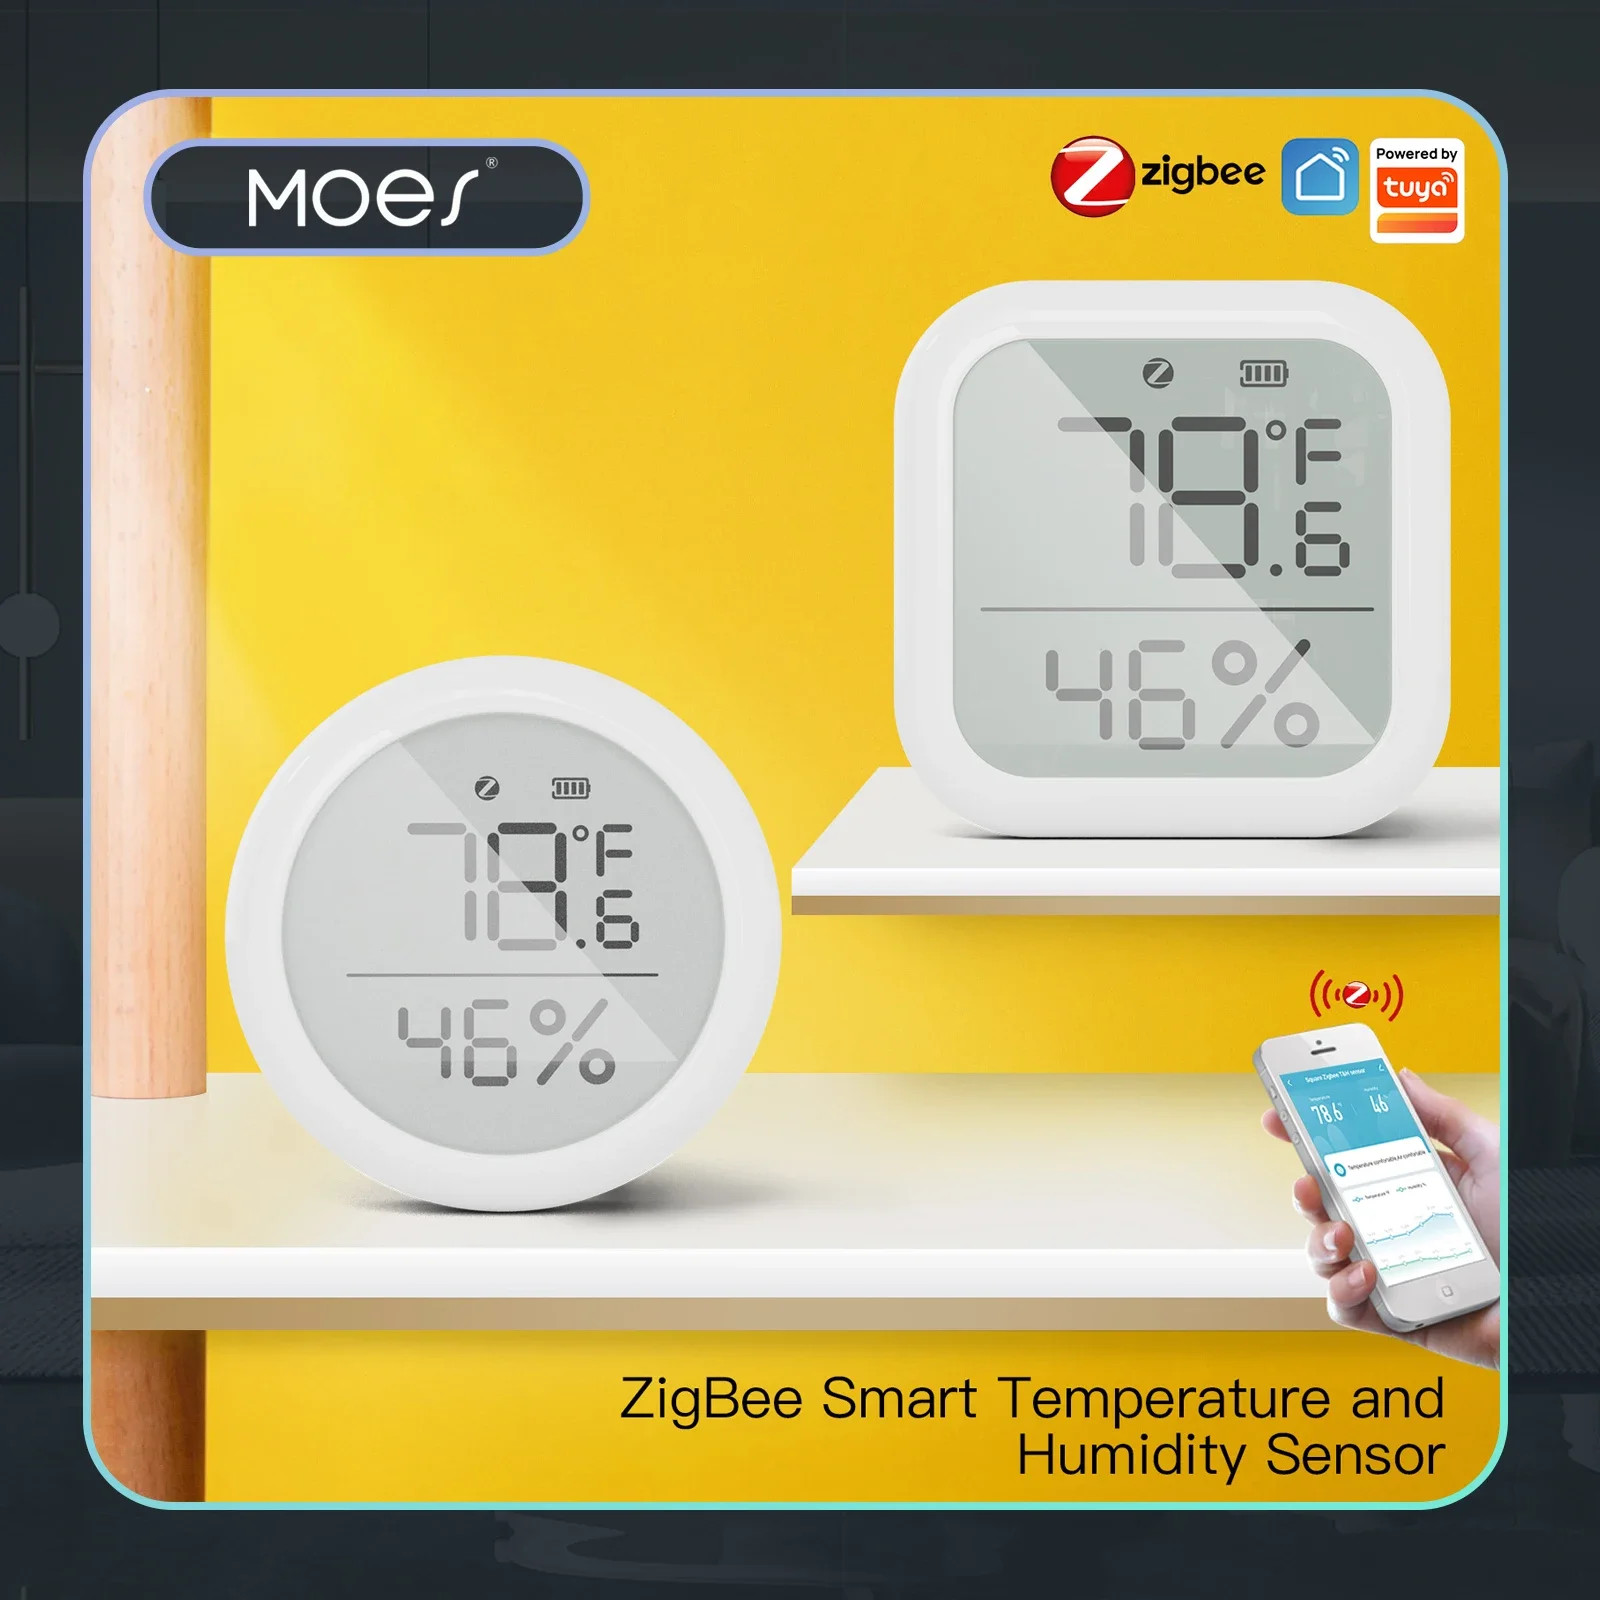 https://ae01.alicdn.com/kf/S391e3ea7028e4a53bd408bd7a1fe5166I/MOES-Tuya-ZigBee-Smart-Home-Temperature-And-Humidity-Sensor-With-LED-Screen-Works-With-Google-Assistant.jpg